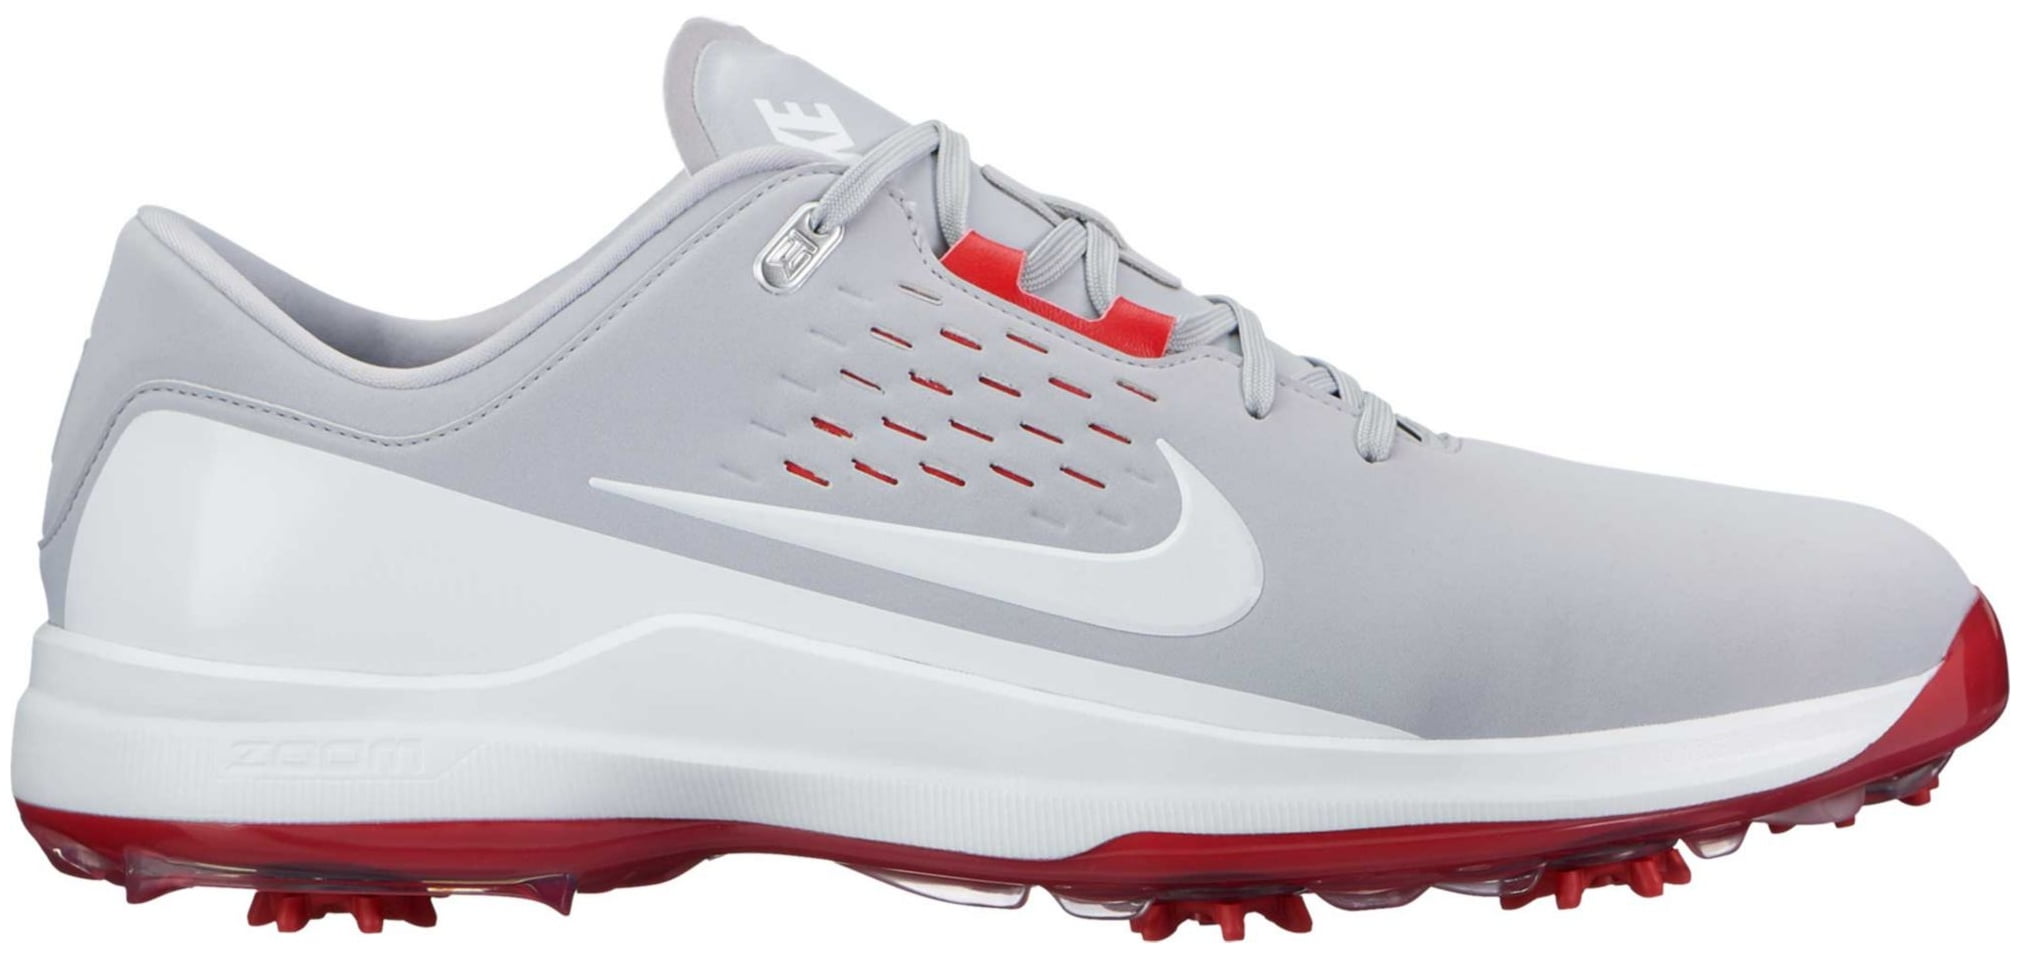 tw71 golf shoes white